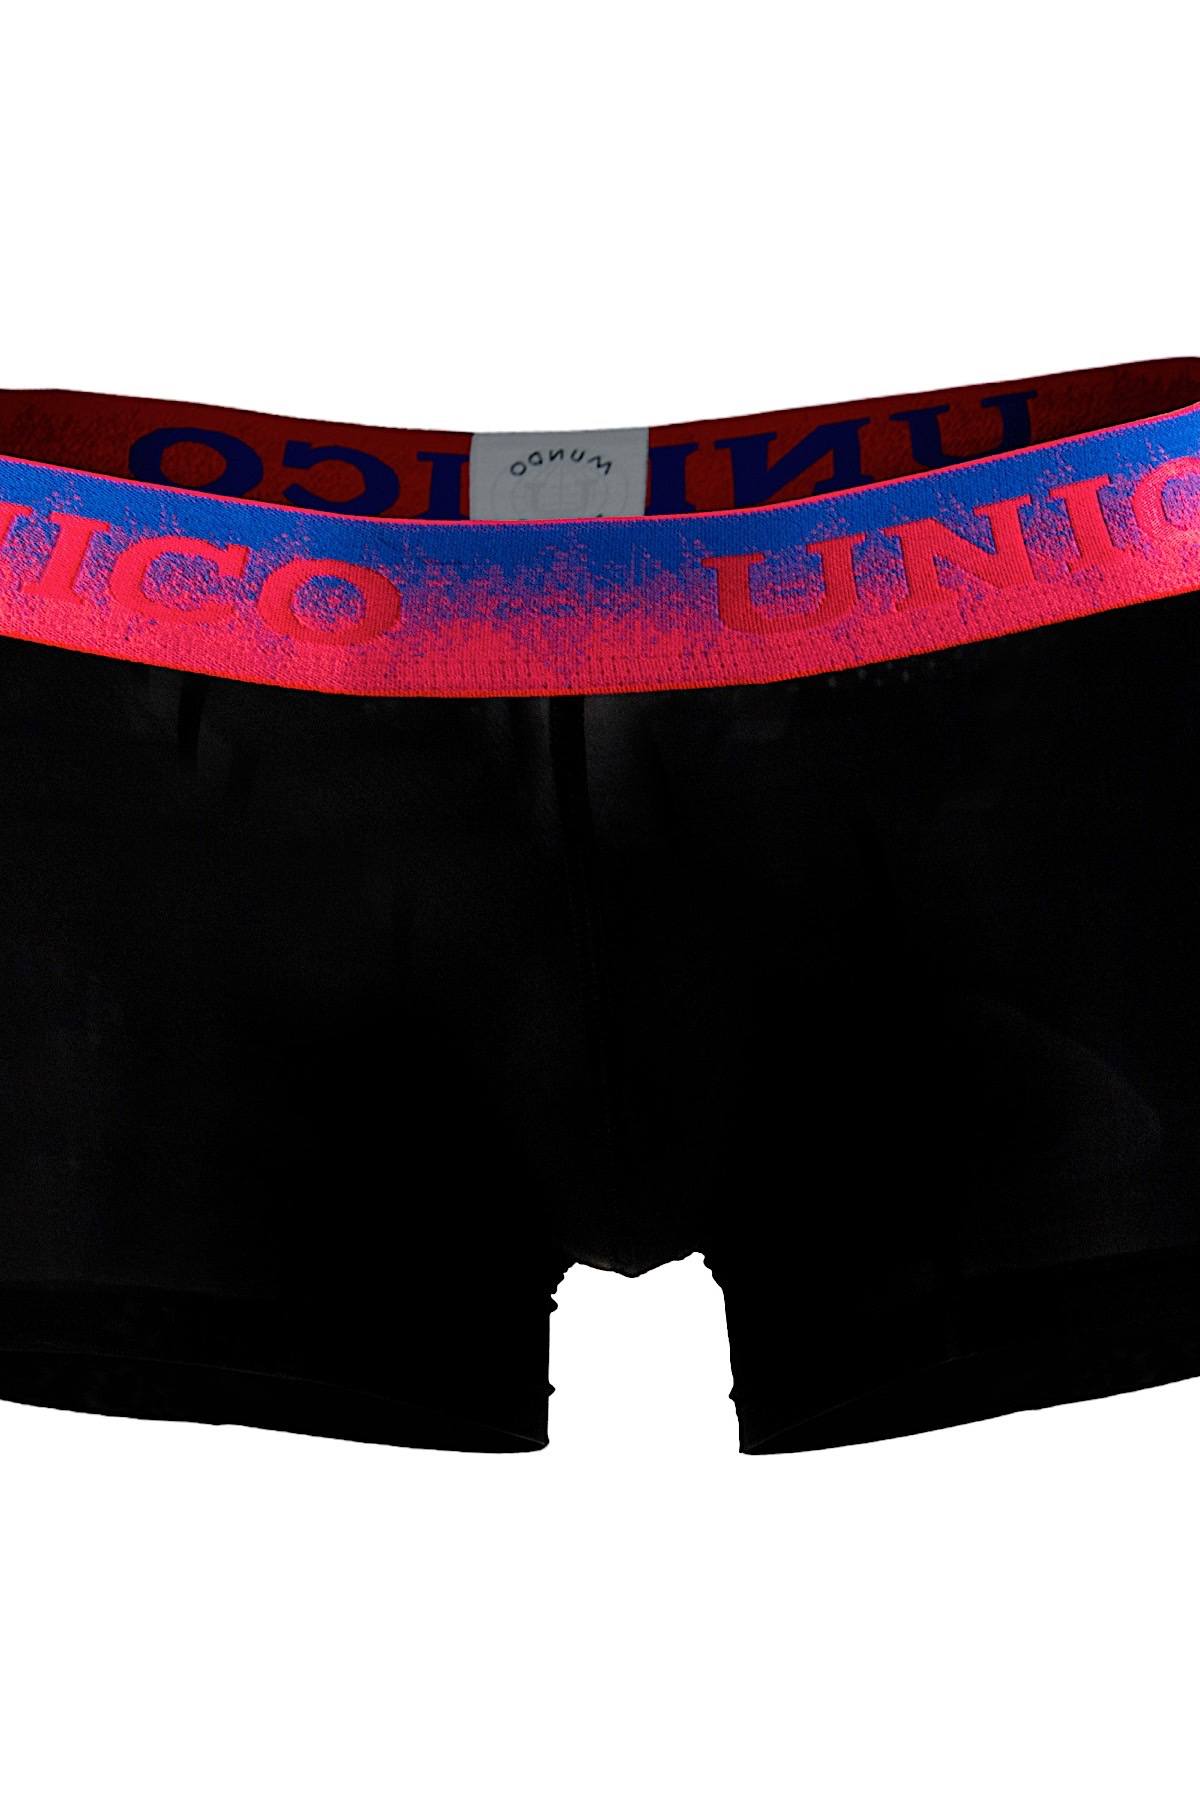 Unico Black/Red/Blue Happiness Trunk